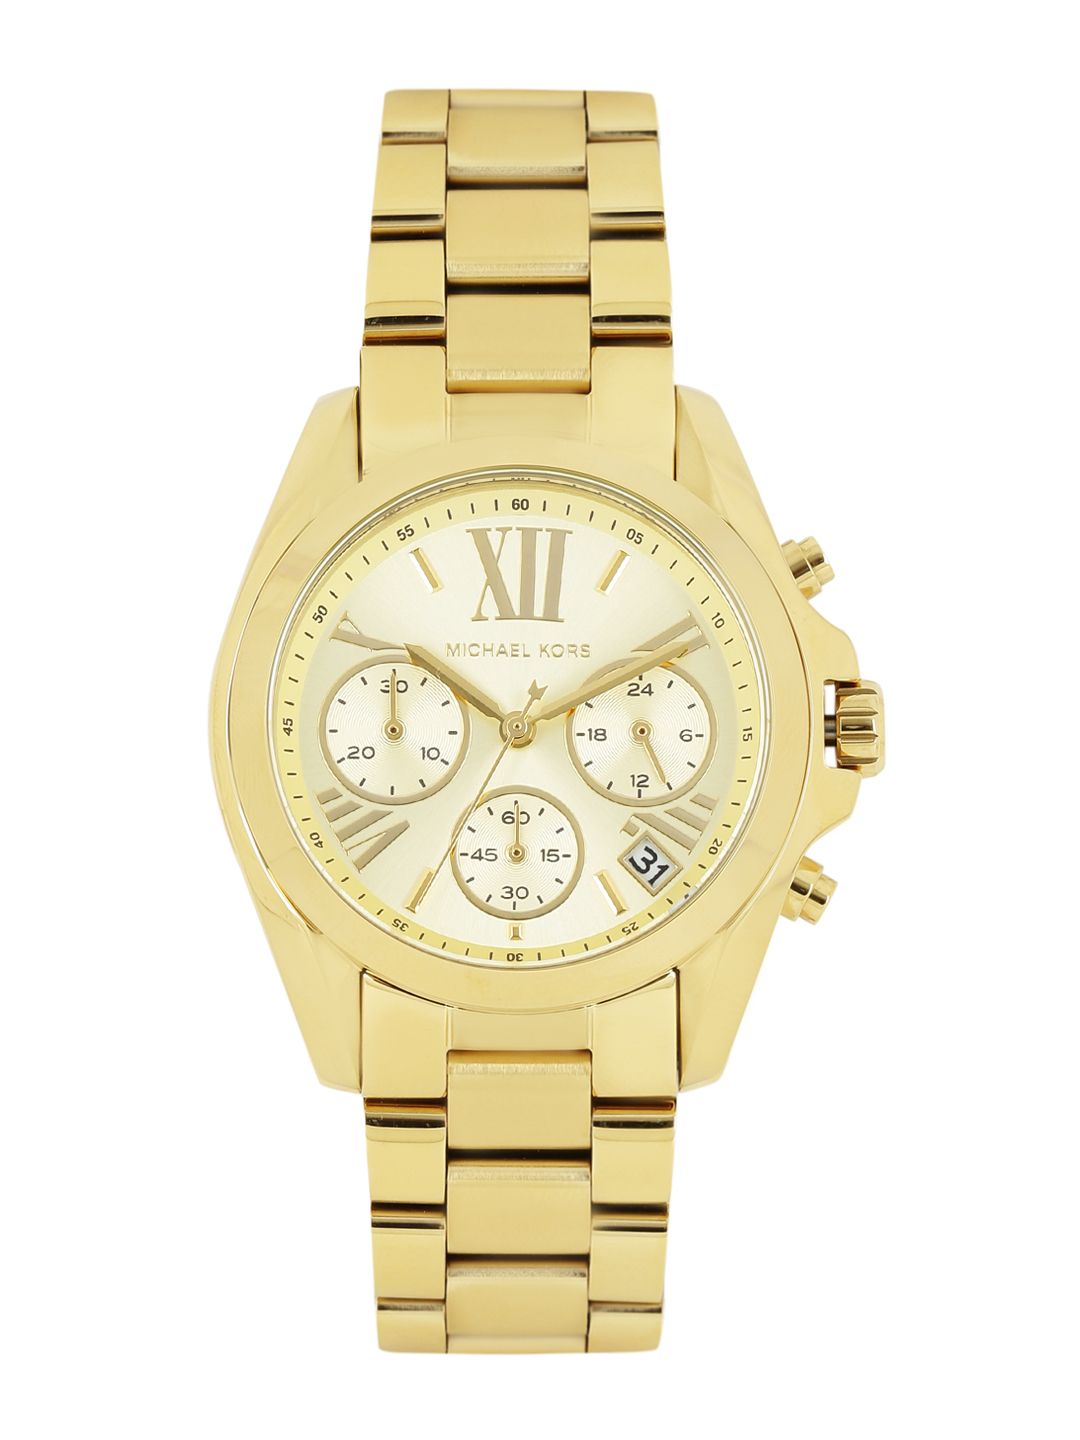 Michael Kors Women Gold-Toned Dial Chronograph Watch MK5798 Price in India